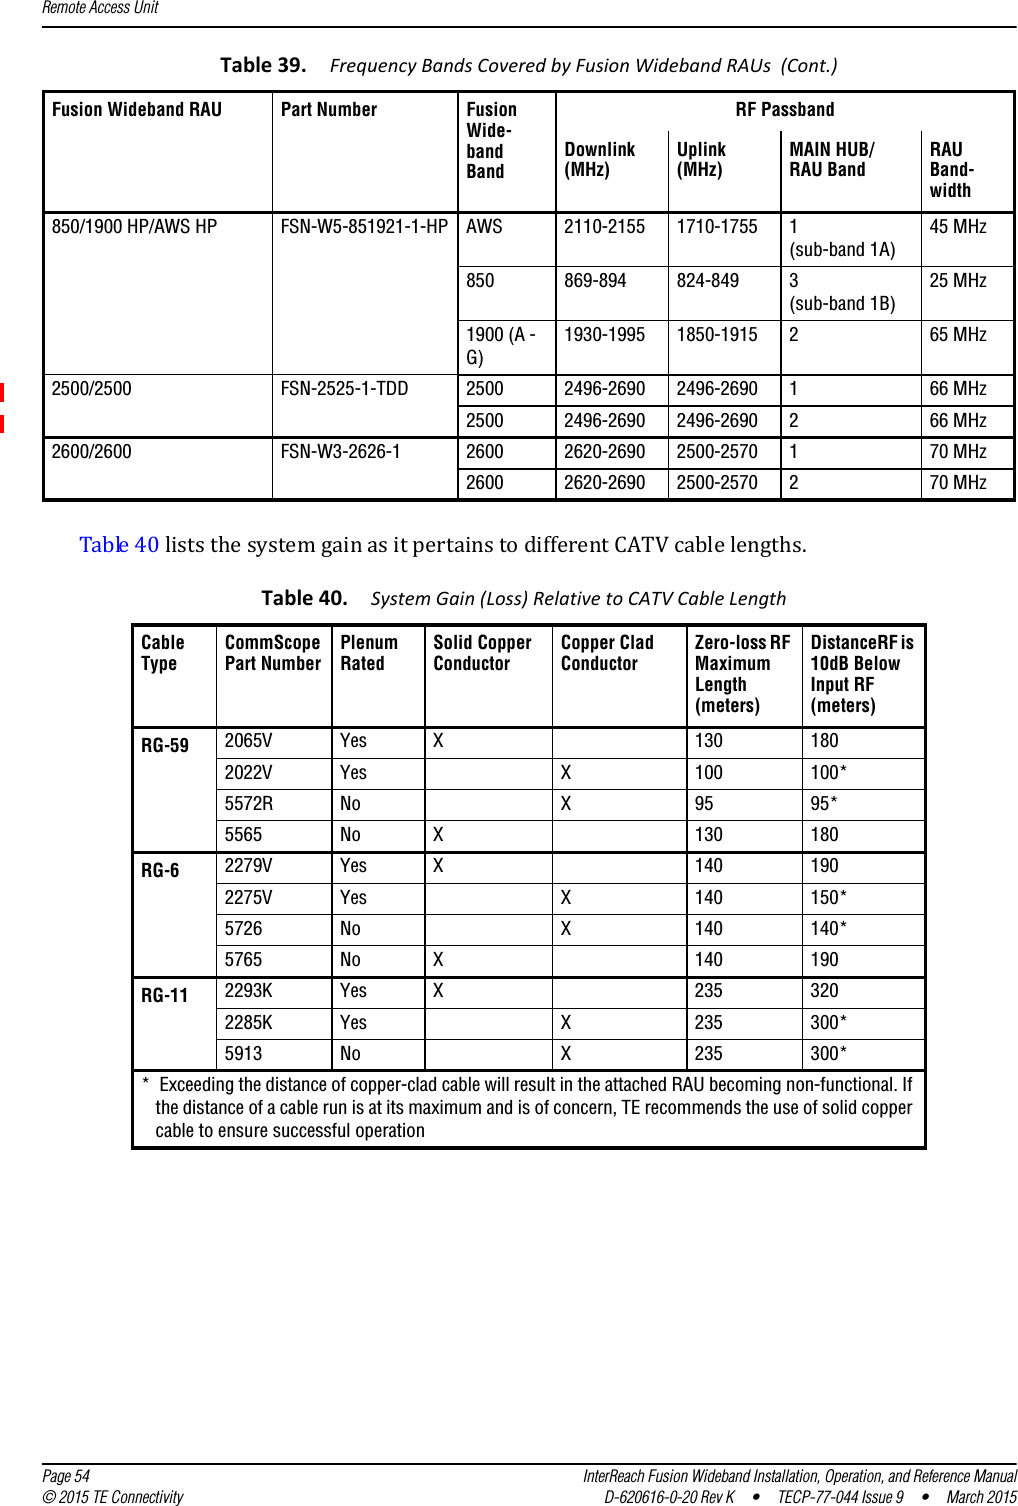 Remote Access Unit  Page 54 InterReach Fusion Wideband Installation, Operation, and Reference Manual© 2015 TE Connectivity D-620616-0-20 Rev K  •  TECP-77-044 Issue 9  •  March 2015Table 40 lists the system gain as it pertains to different CATV cable lengths.850/1900 HP/AWS HP FSN-W5-851921-1-HP AWS 2110-2155 1710-1755 1 (sub-band 1A)45 MHz850 869-894 824-849 3 (sub-band 1B)25 MHz1900 (A - G)1930-1995 1850-1915 2 65 MHz2500/2500 FSN-2525-1-TDD 2500 2496-2690 2496-2690 1 66 MHz2500 2496-2690 2496-2690 2 66 MHz2600/2600 FSN-W3-2626-1 2600 2620-2690 2500-2570 1 70 MHz2600 2620-2690 2500-2570 2 70 MHzTable 40. System Gain (Loss) Relative to CATV Cable Length  Cable TypeCommScope Part NumberPlenum RatedSolid Copper ConductorCopper Clad ConductorZero-loss RF Maximum Length (meters)DistanceRF is 10dB Below Input RF (meters)RG-59 2065V Yes X 130 1802022V Yes X 100 100*5572R No X 95 95*5565 No X 130 180RG-6 2279V Yes X 140 1902275V Yes X 140 150*5726 No X 140 140*5765 No X 140 190RG-11 2293K Yes X 235 3202285K Yes X 235 300*5913 No X 235 300**  Exceeding the distance of copper-clad cable will result in the attached RAU becoming non-functional. If the distance of a cable run is at its maximum and is of concern, TE recommends the use of solid copper cable to ensure successful operationTable 39.  Frequency Bands Covered by Fusion Wideband RAUs  (Cont.)Fusion Wideband RAU Part Number Fusion Wide- band BandRF PassbandDownlink (MHz) Uplink (MHz)MAIN HUB/ RAU BandRAU Band- width